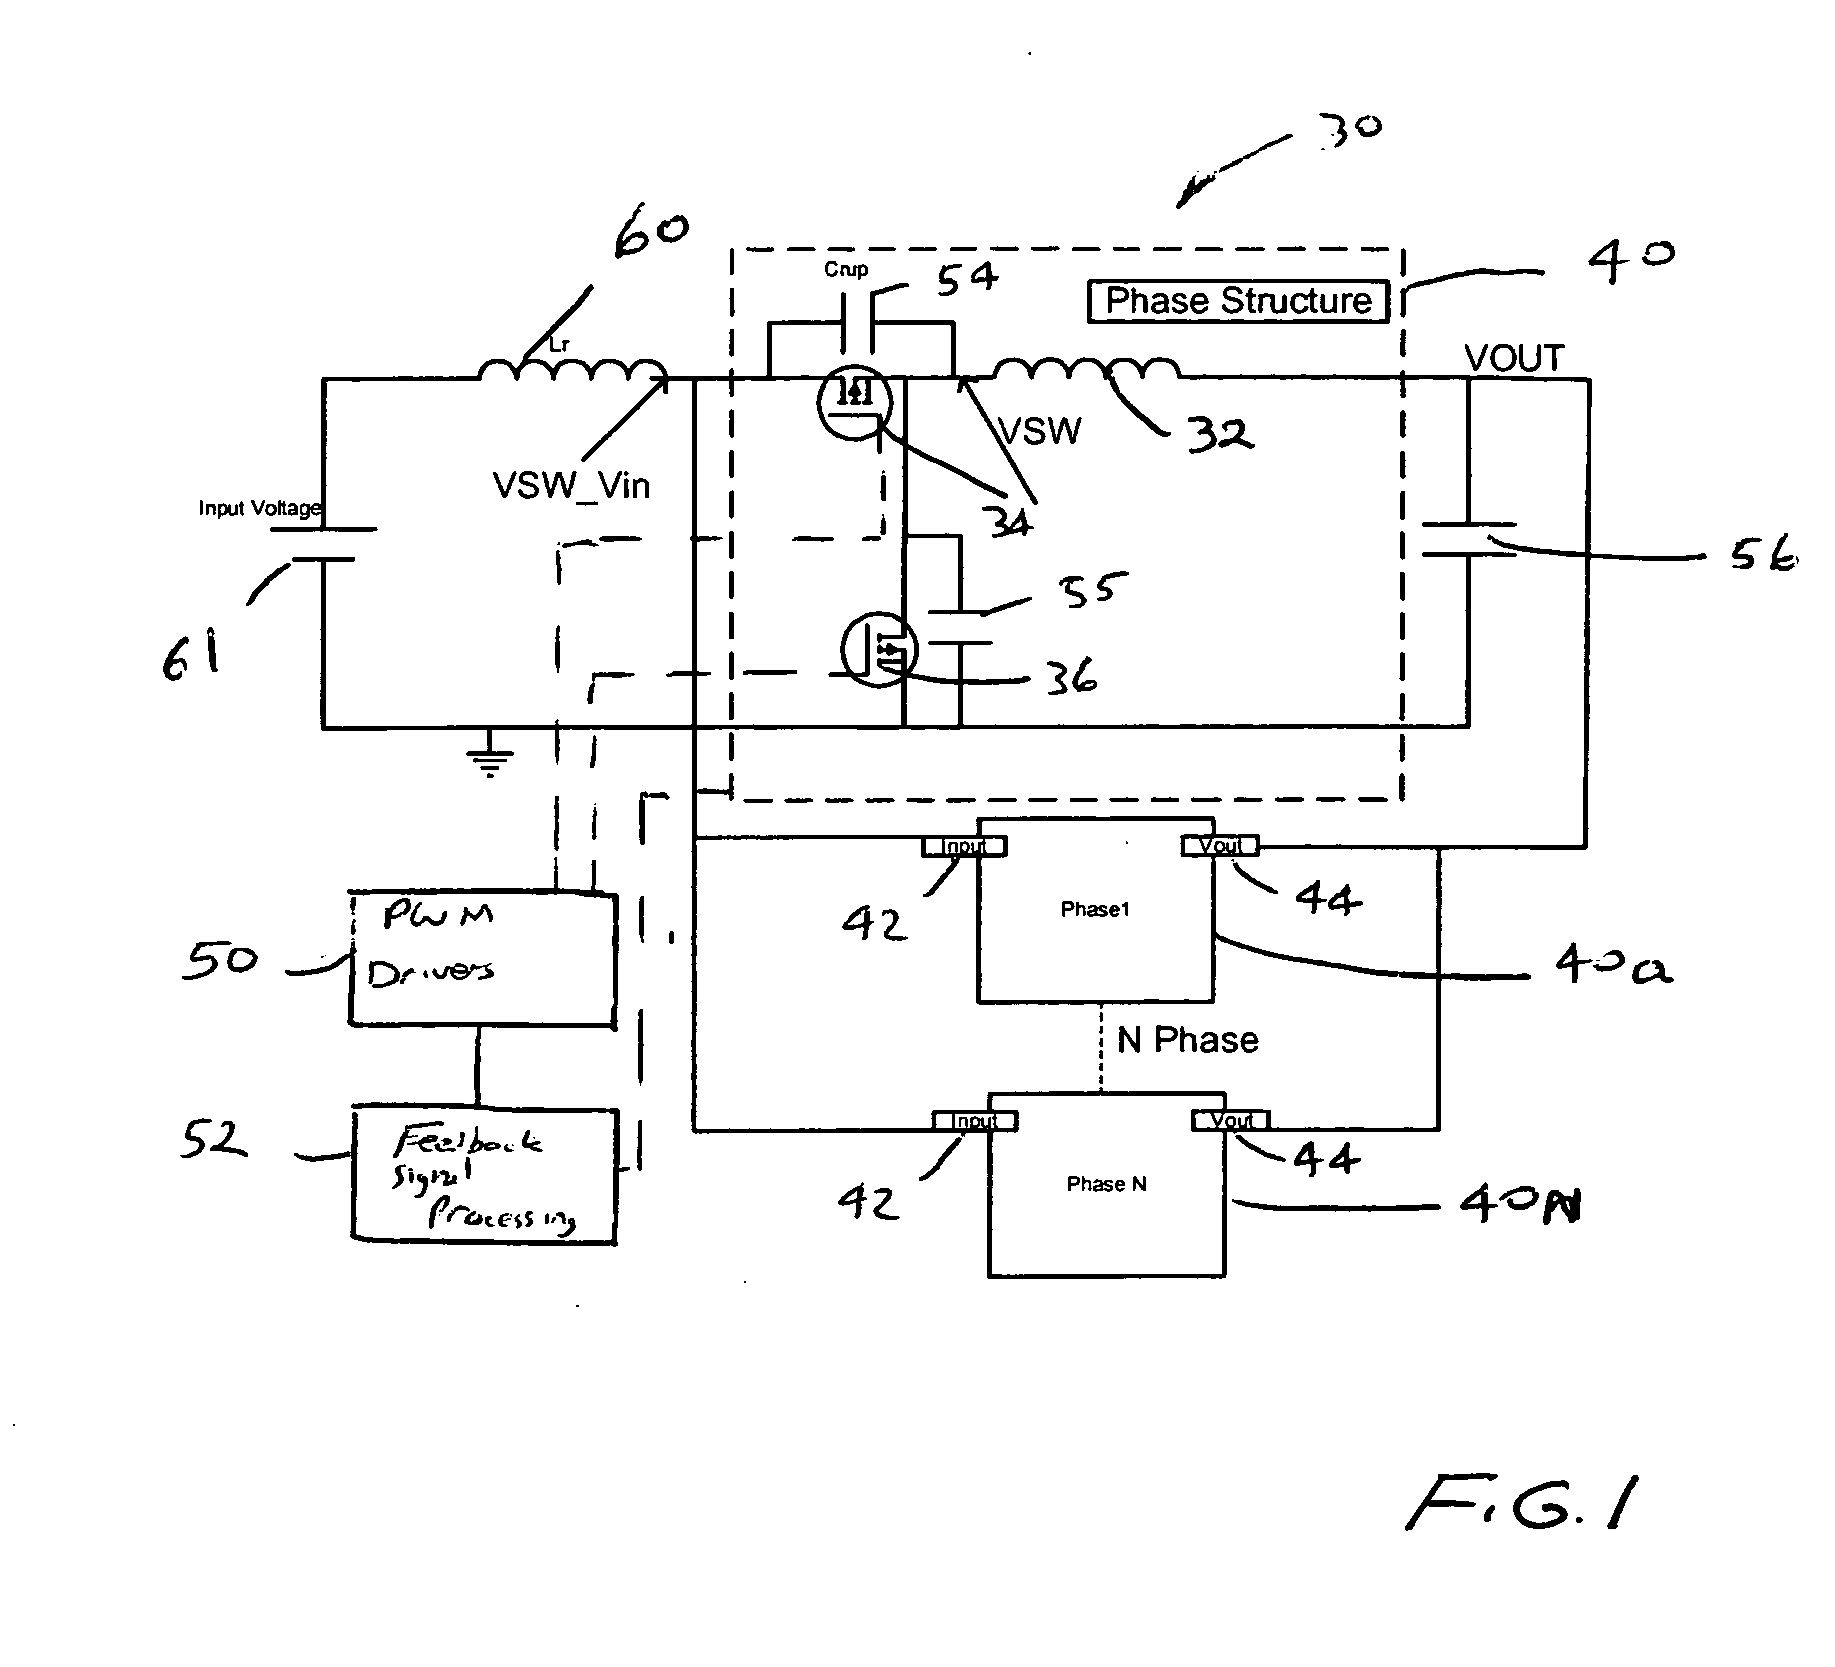 Multiphase converter with zero voltage switching